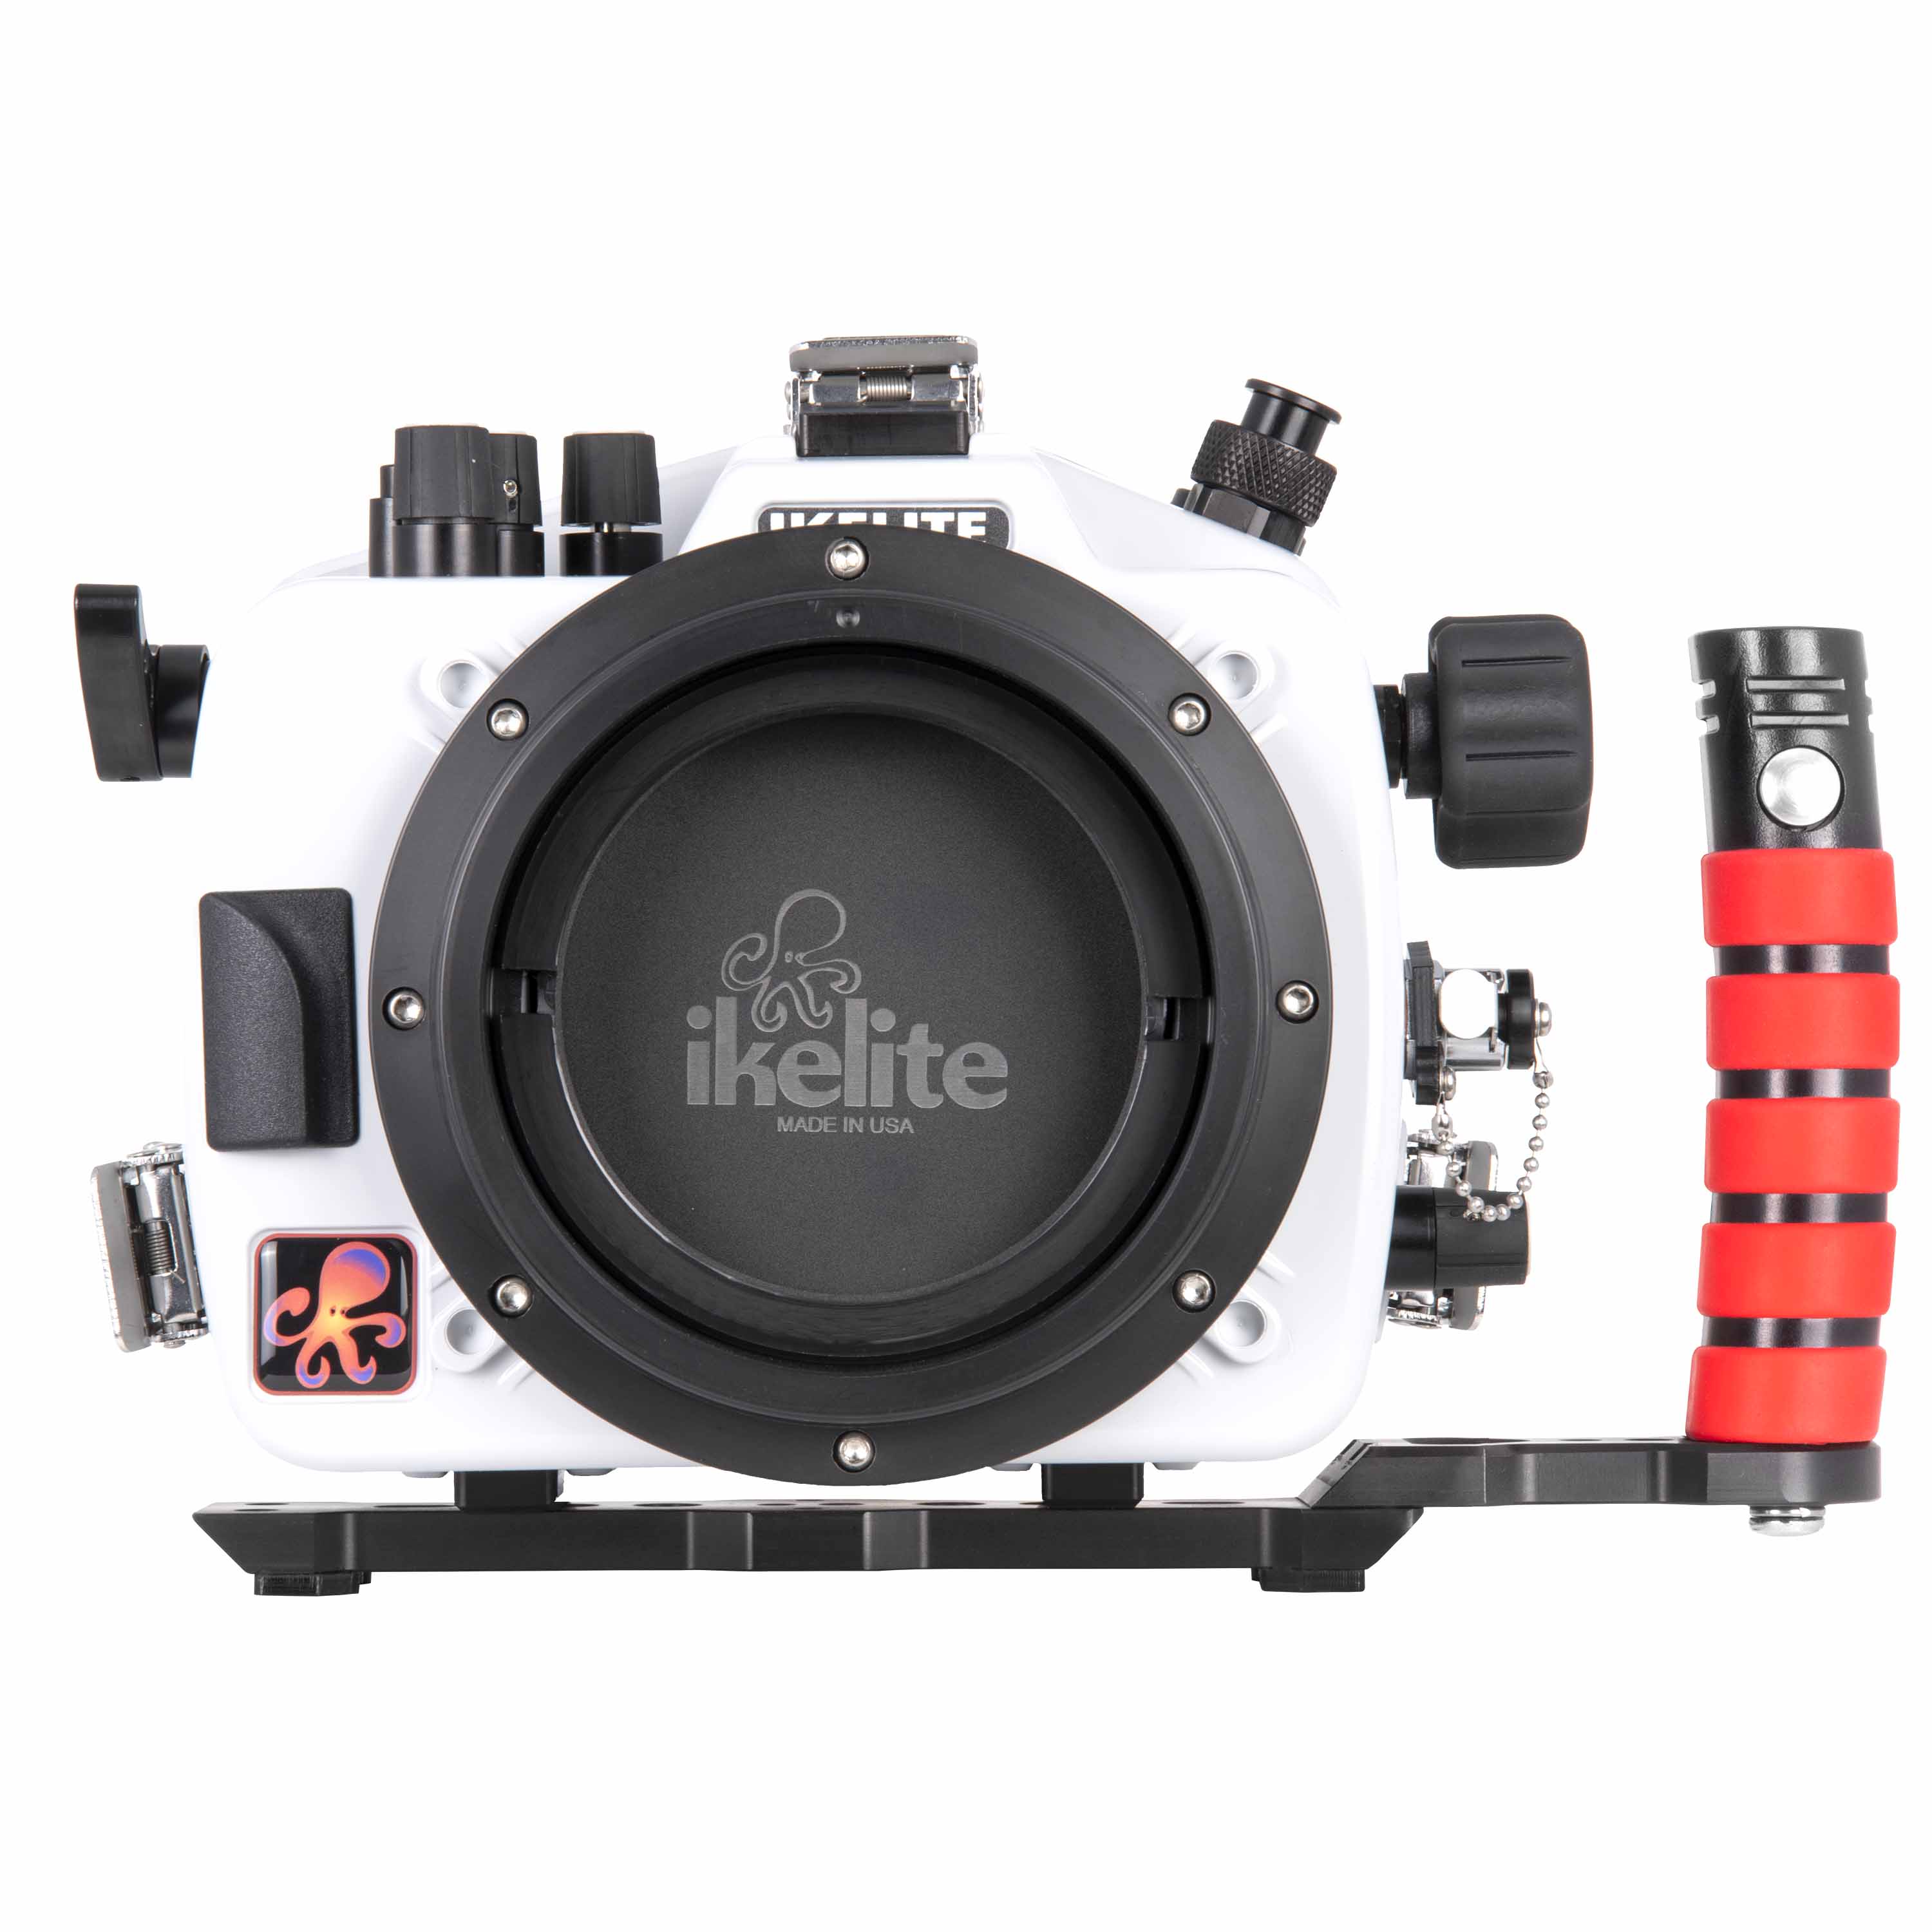 Ikelite 200DL Underwater Housing for Sony Alpha A7, A7R, A7S Mirrorless Cameras